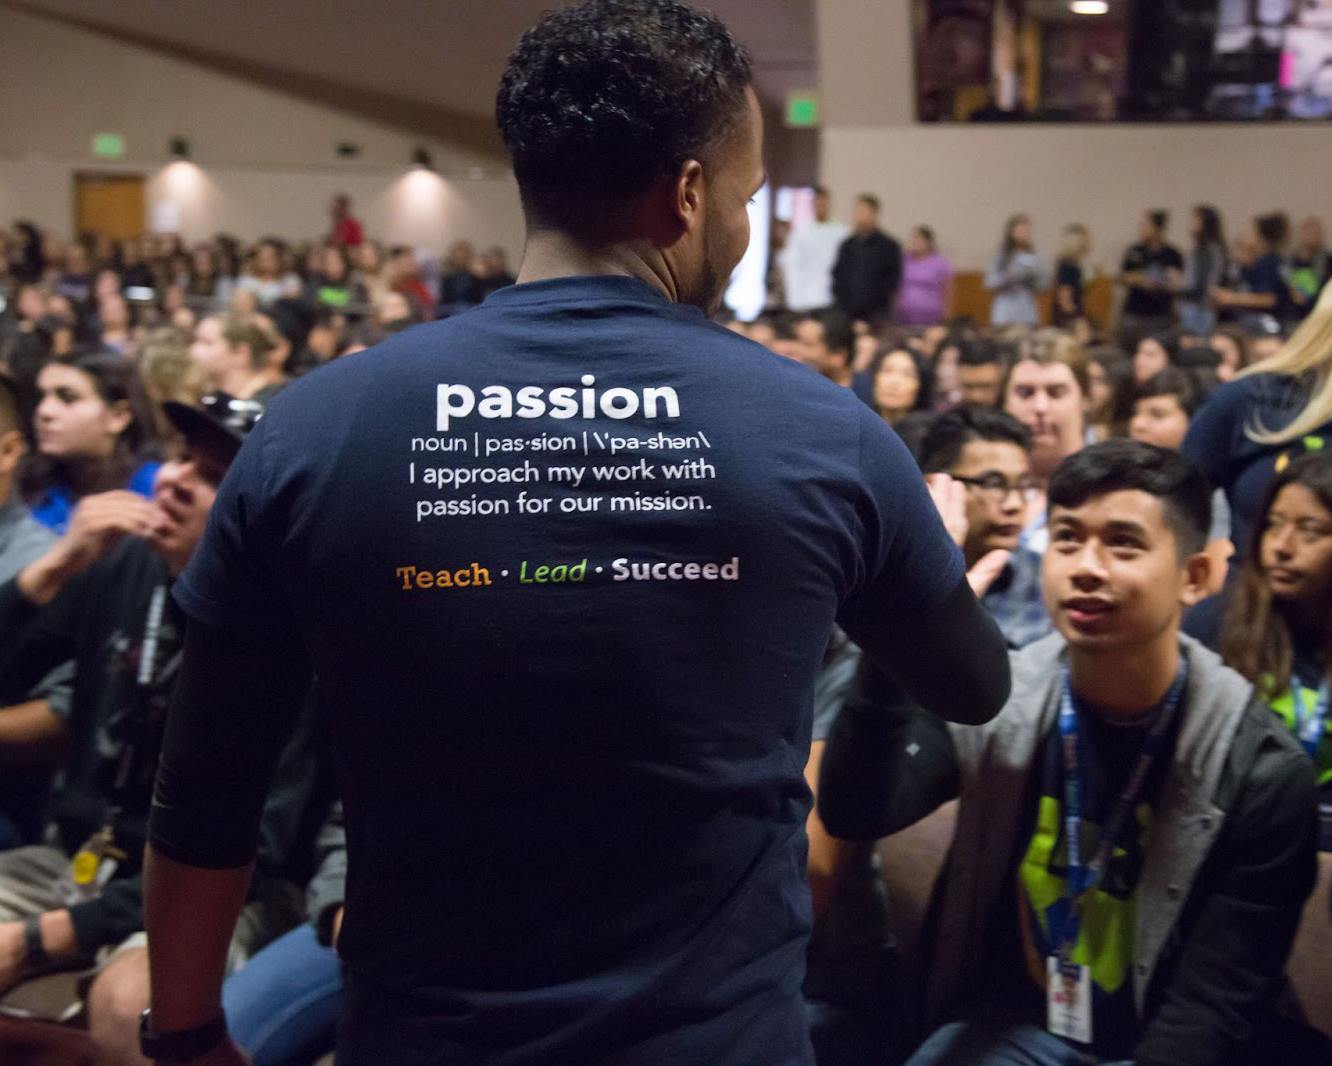 Image of a male with back against screen, greeting another male. The back of his shirt has the word Passion.